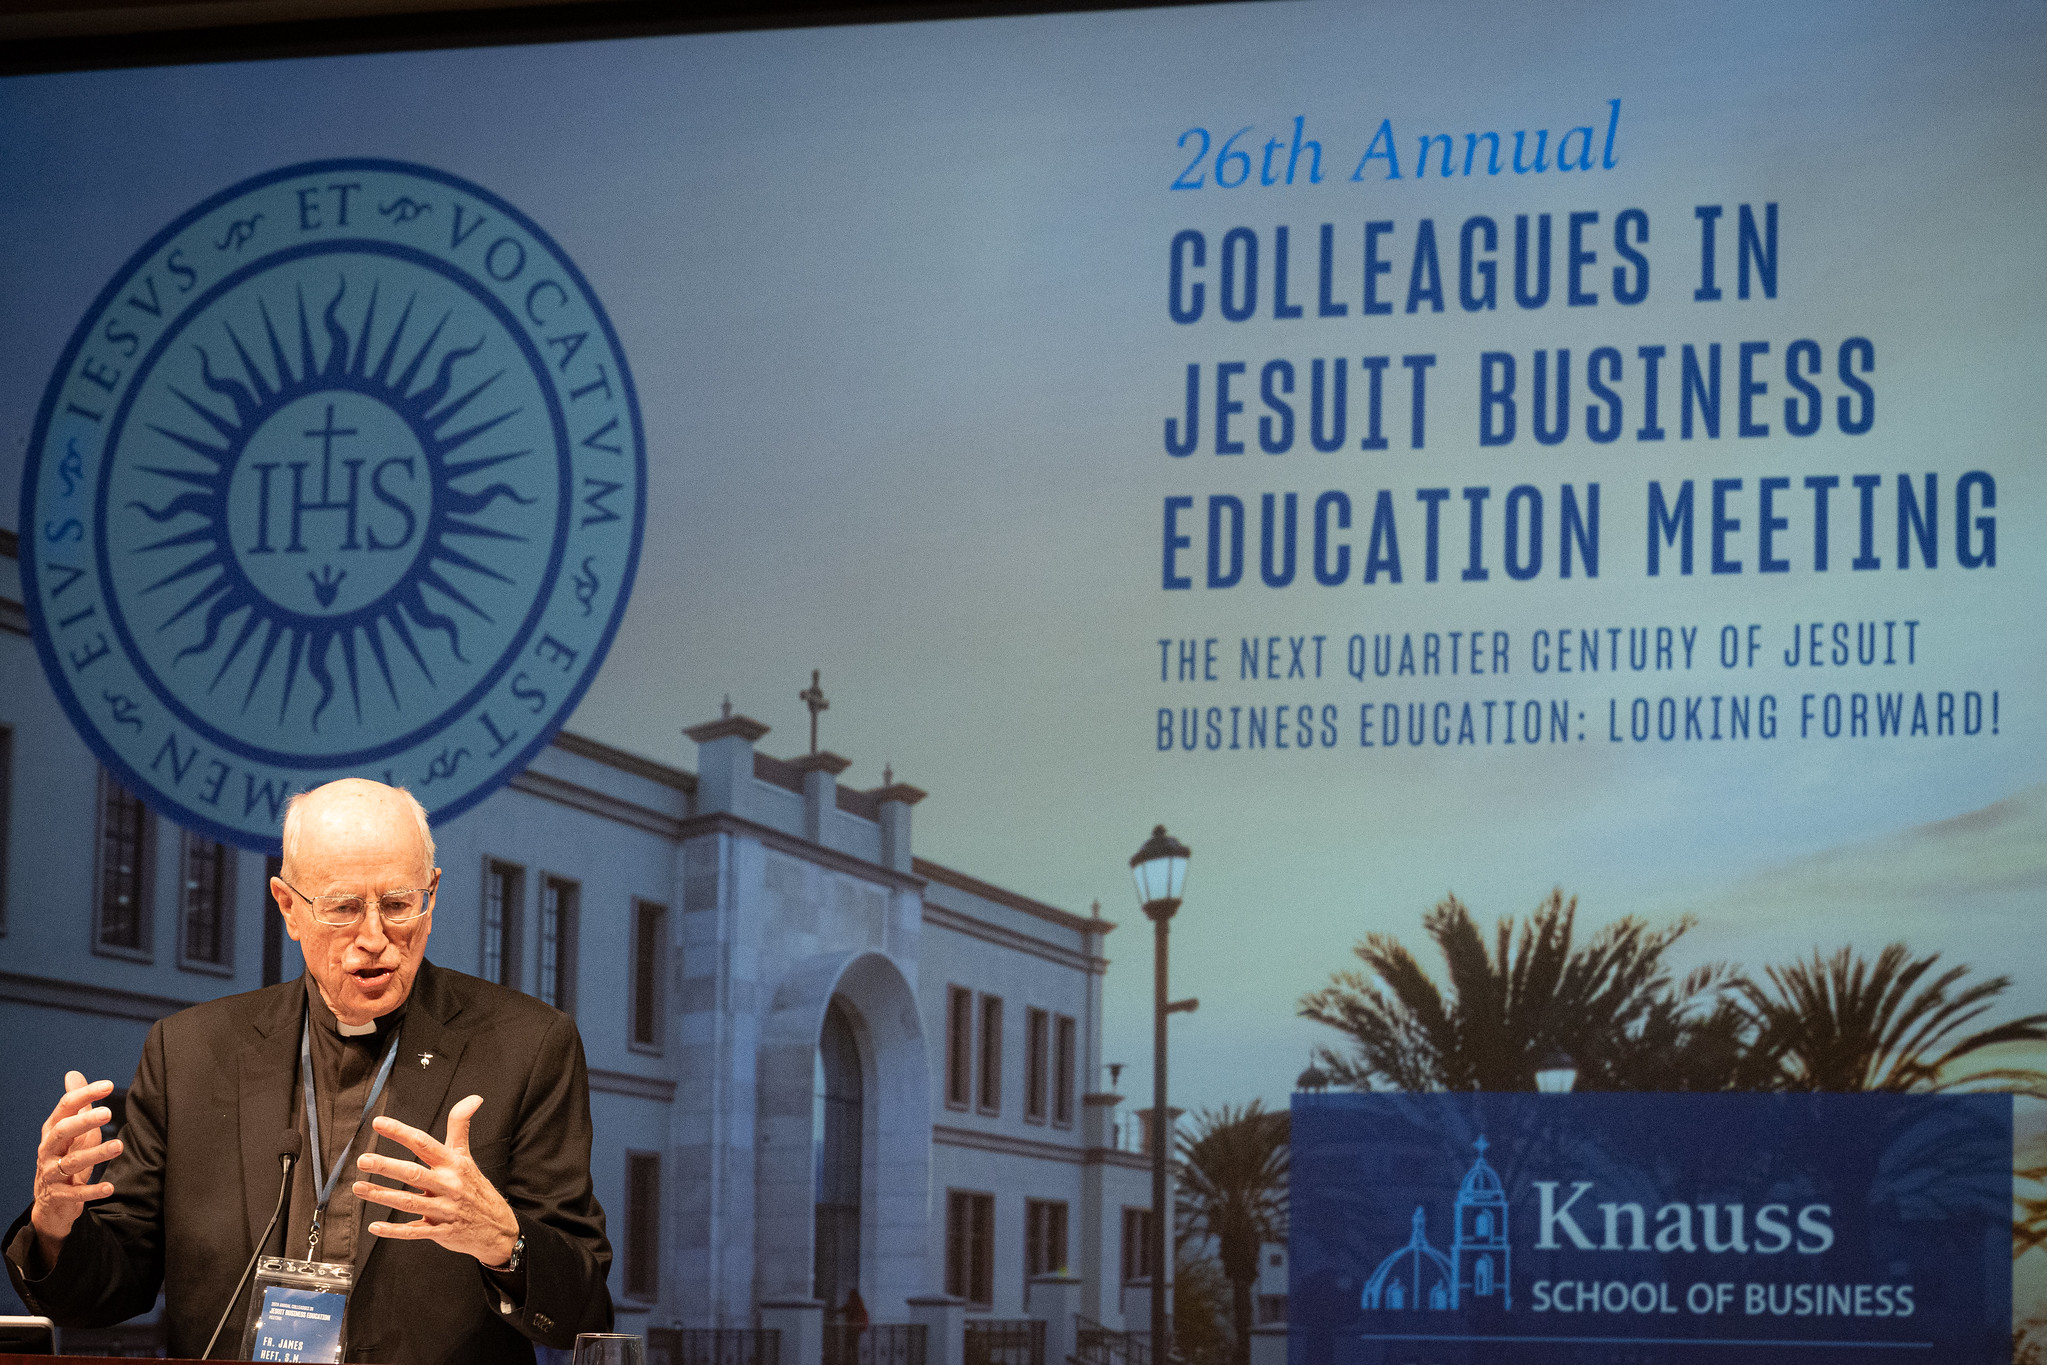 26th Annual Colleagues in Jesuit Business Education Meeting: A Gathering of Minds and Values